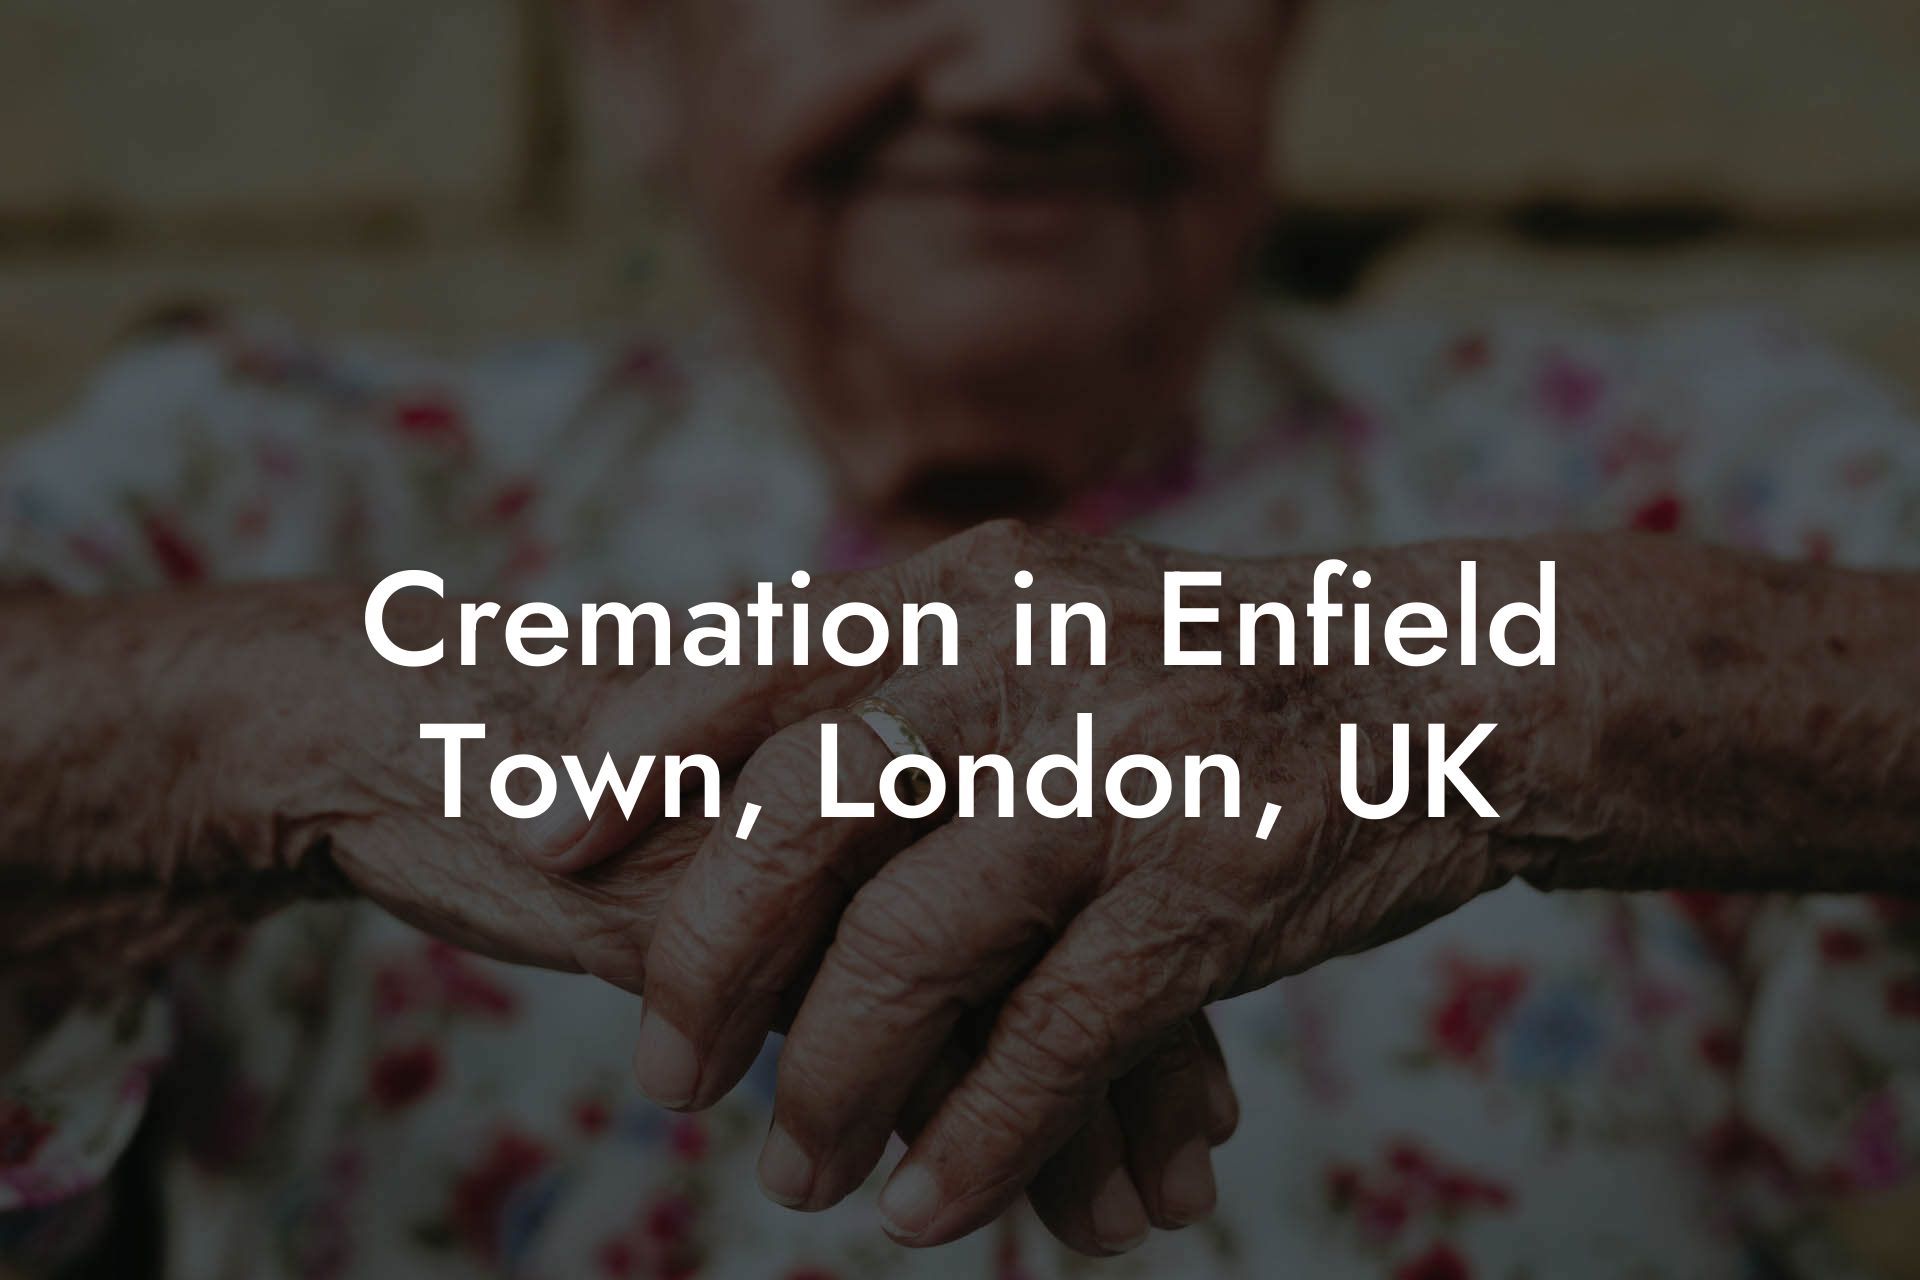 Cremation in Enfield Town, London, UK